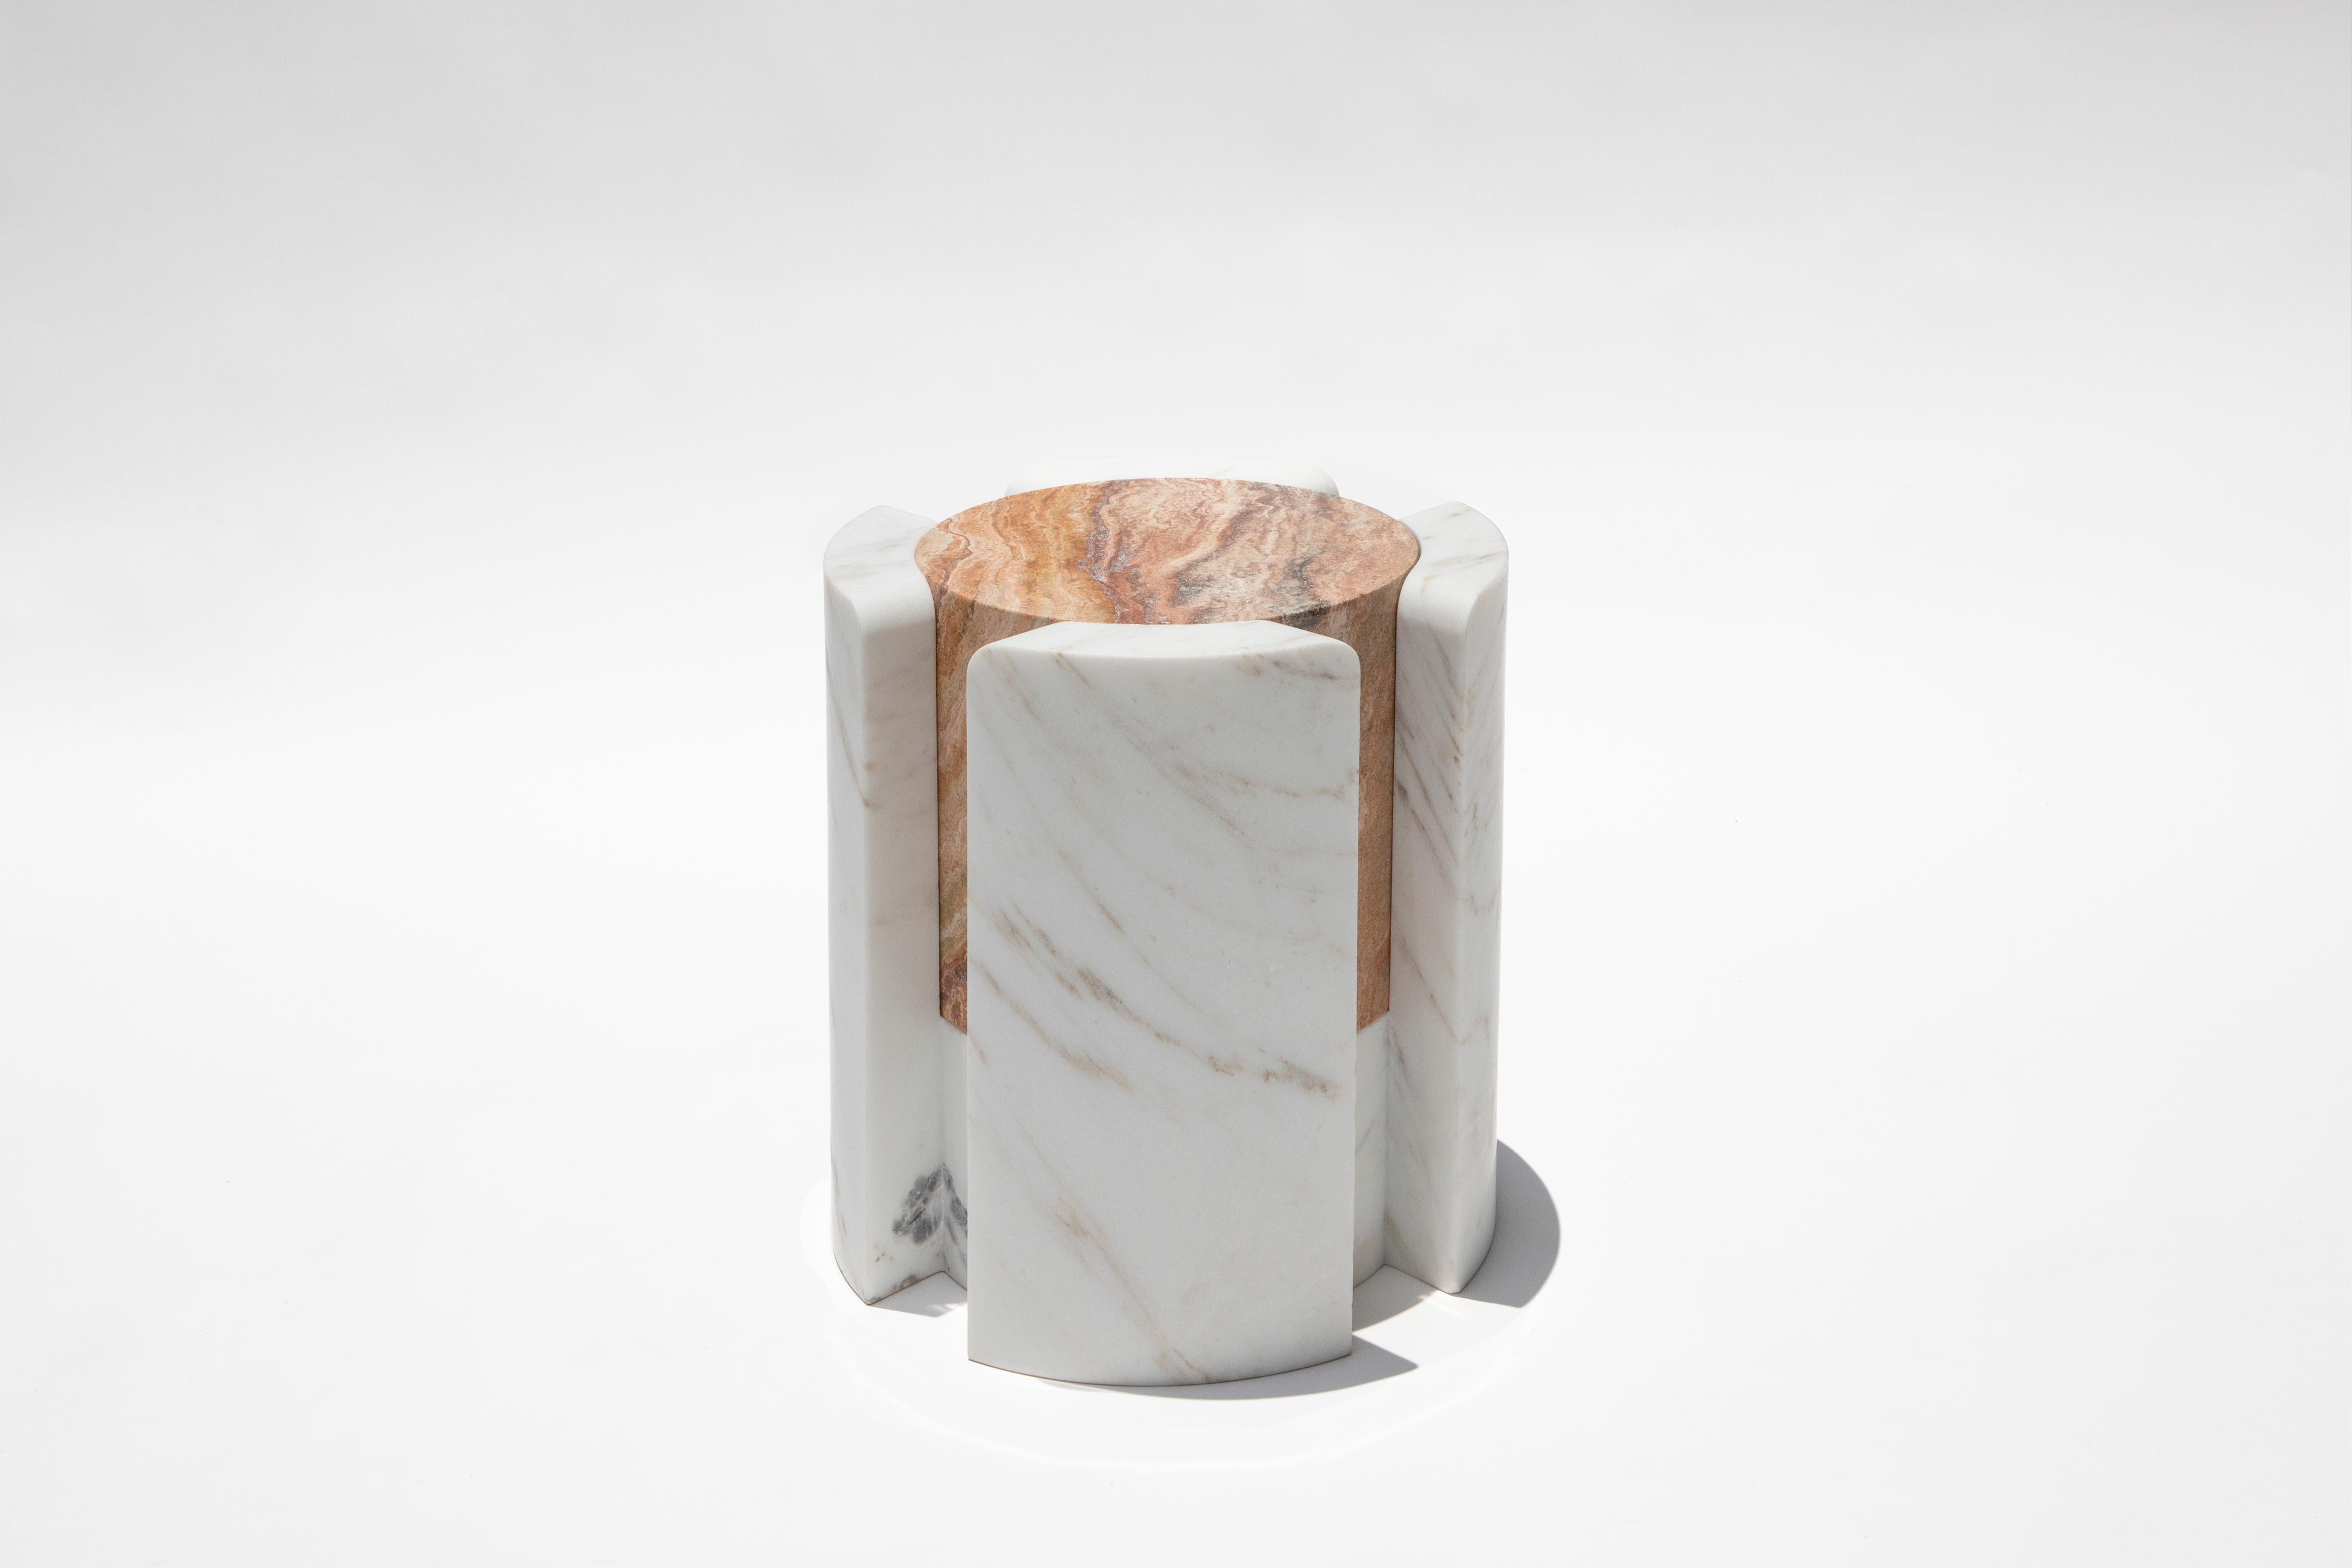 Volcanic Shade of Marble III by Sten Studio

Golden calacatta marble, natural stone

14.9 x 14.9 x 15.9 in

Serving as a visual metaphor for volcanoes that, through their craters, open faultlines into the Earth’s core, they are made from